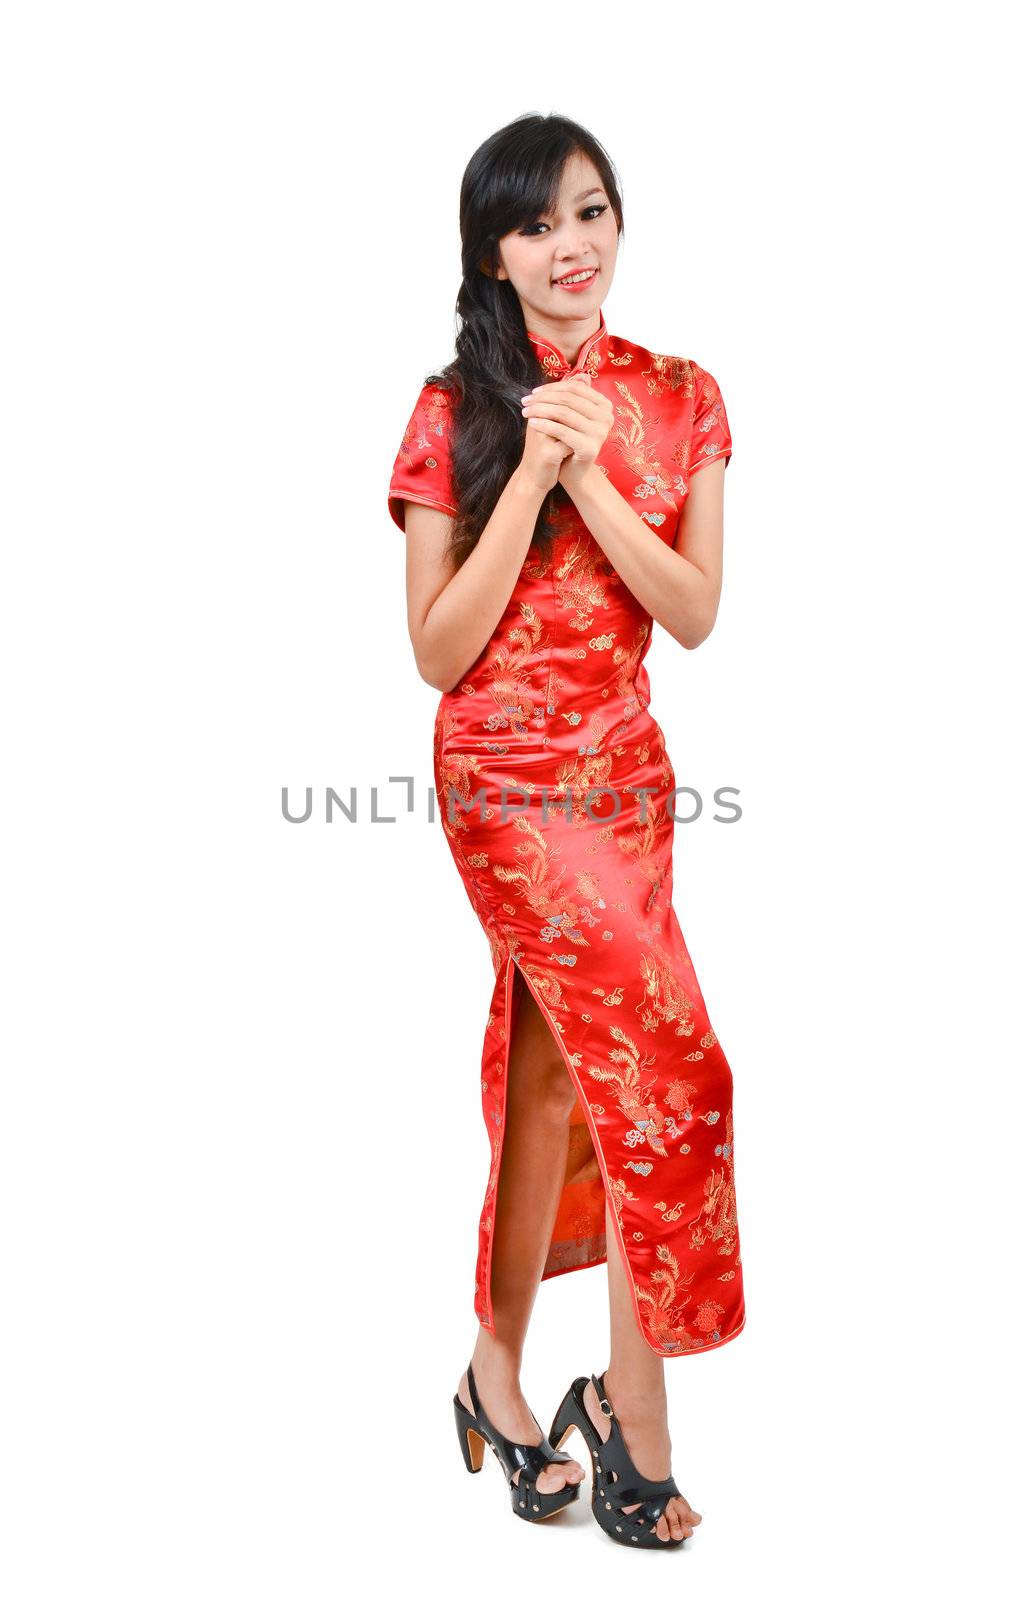 pretty girl with cheongsam wishing you a happy Chinese new year onwhite background